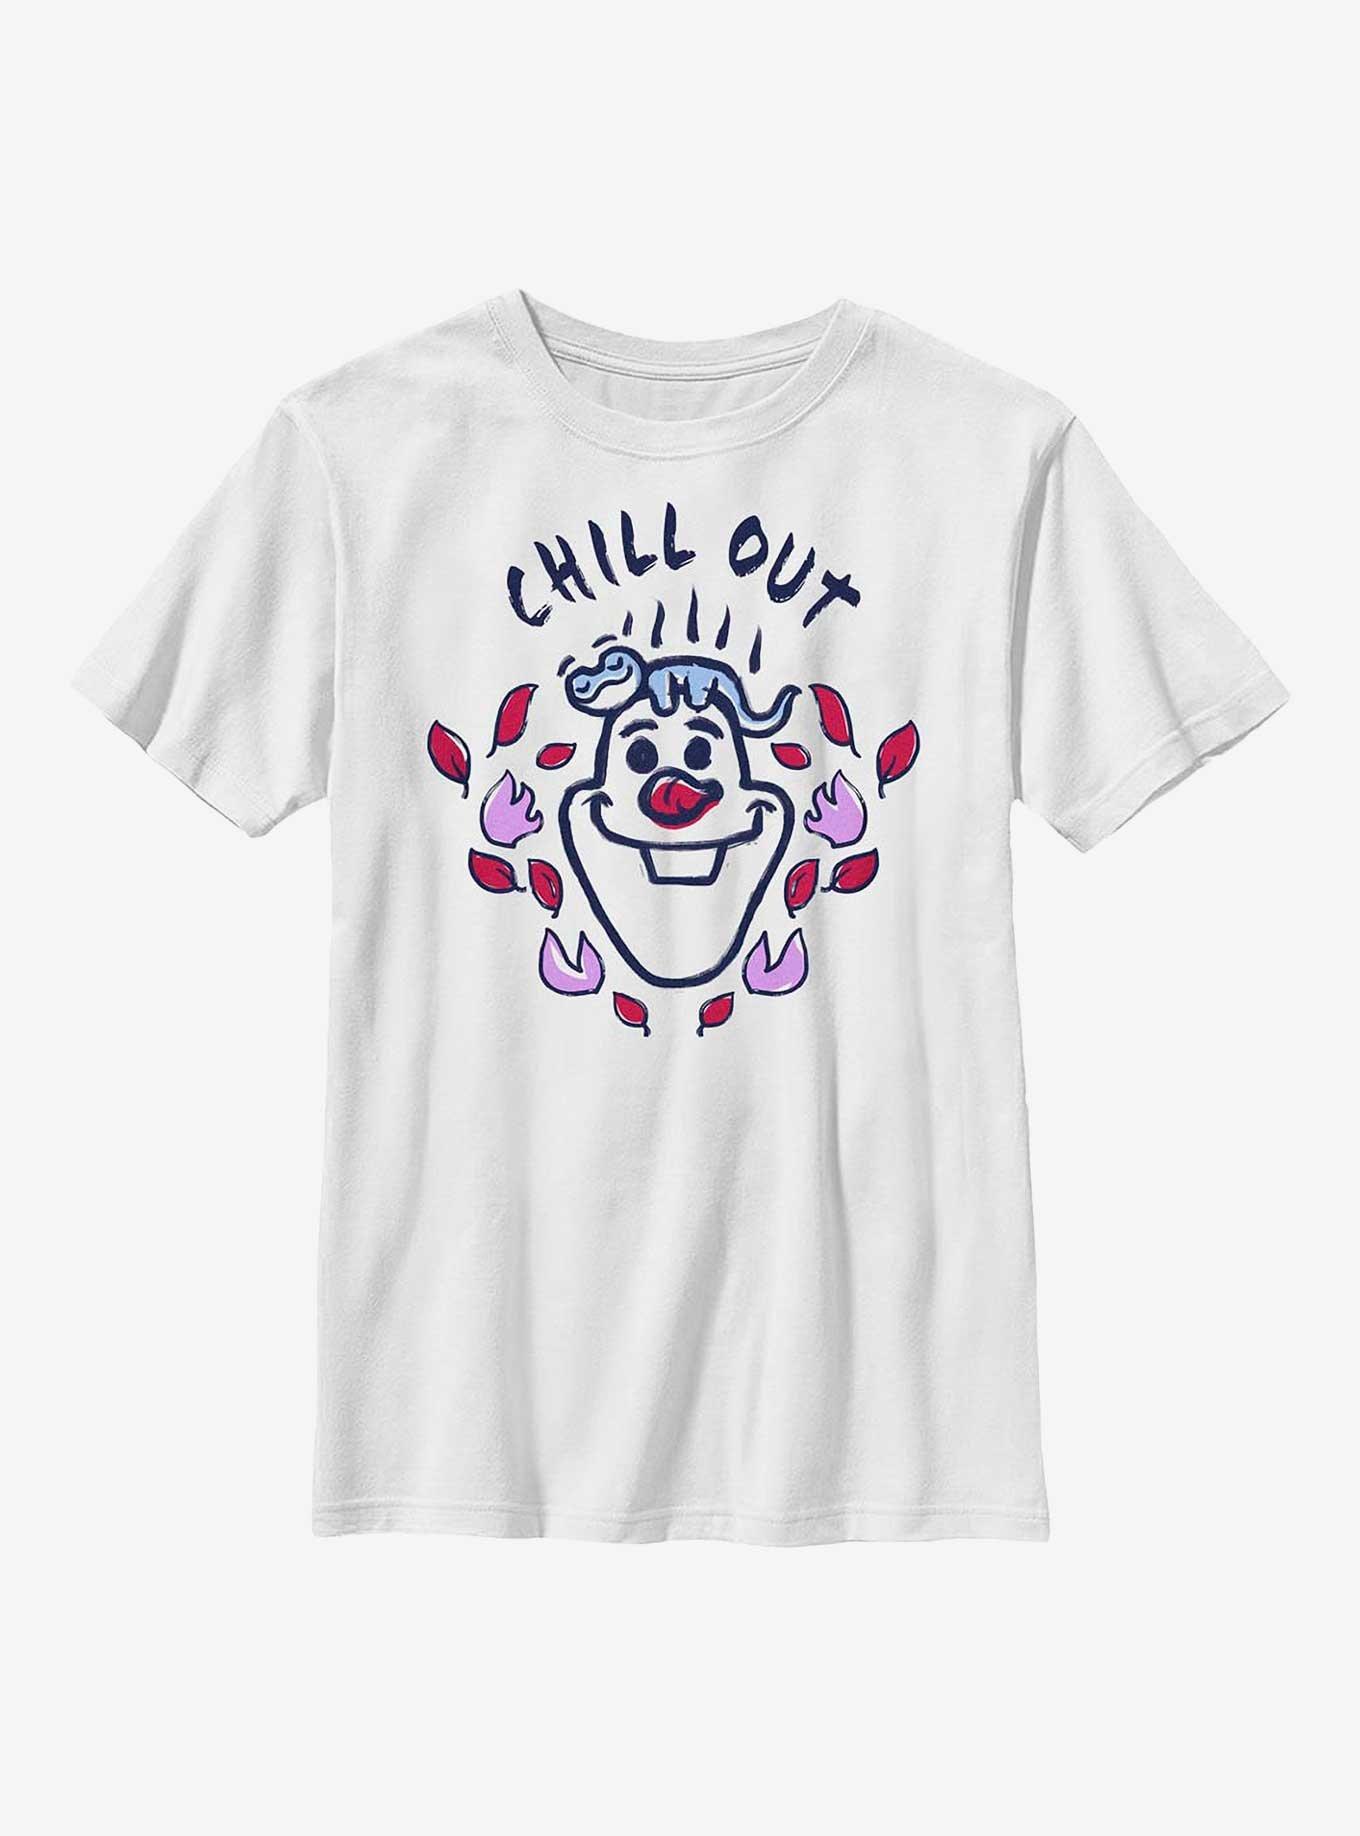 Disney Frozen 2 Olaf Chill Out Youth T-Shirt, WHITE, hi-res